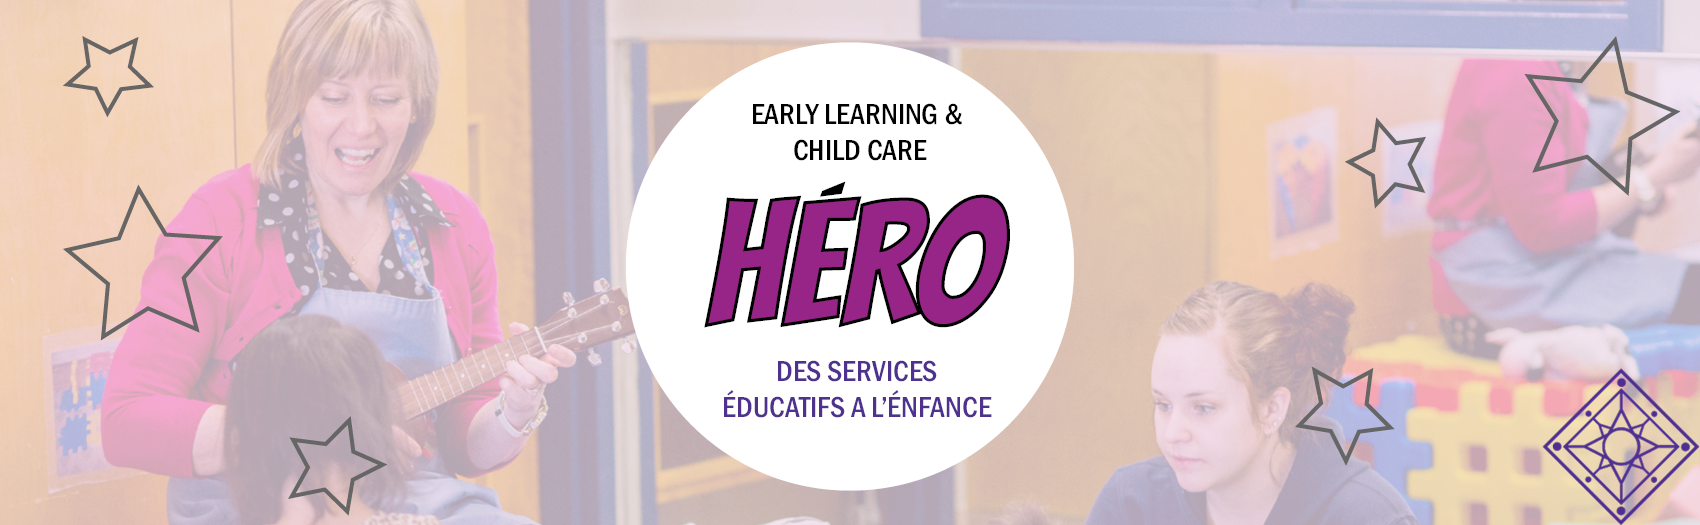 Child care worker playing music with children around them. Text overlay reads: Early Learning & Child Care Hero / Héro des services éducatifs a l'énfance. Child Care Worker & Early Childhood Educator Appreciation Day, October 21, 2021